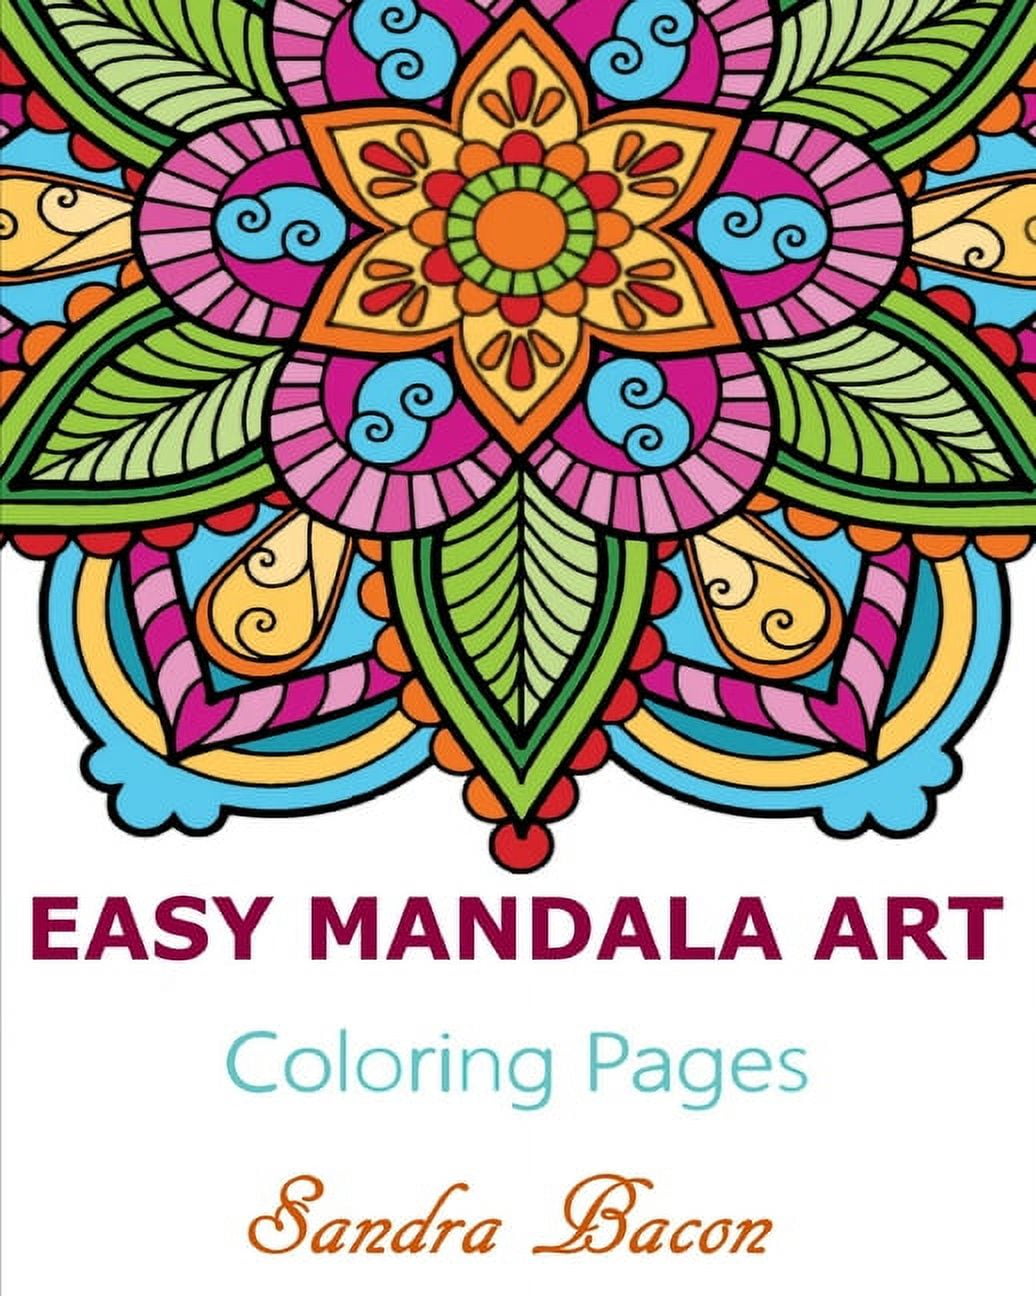 Easy mandala art coloring pages paperback